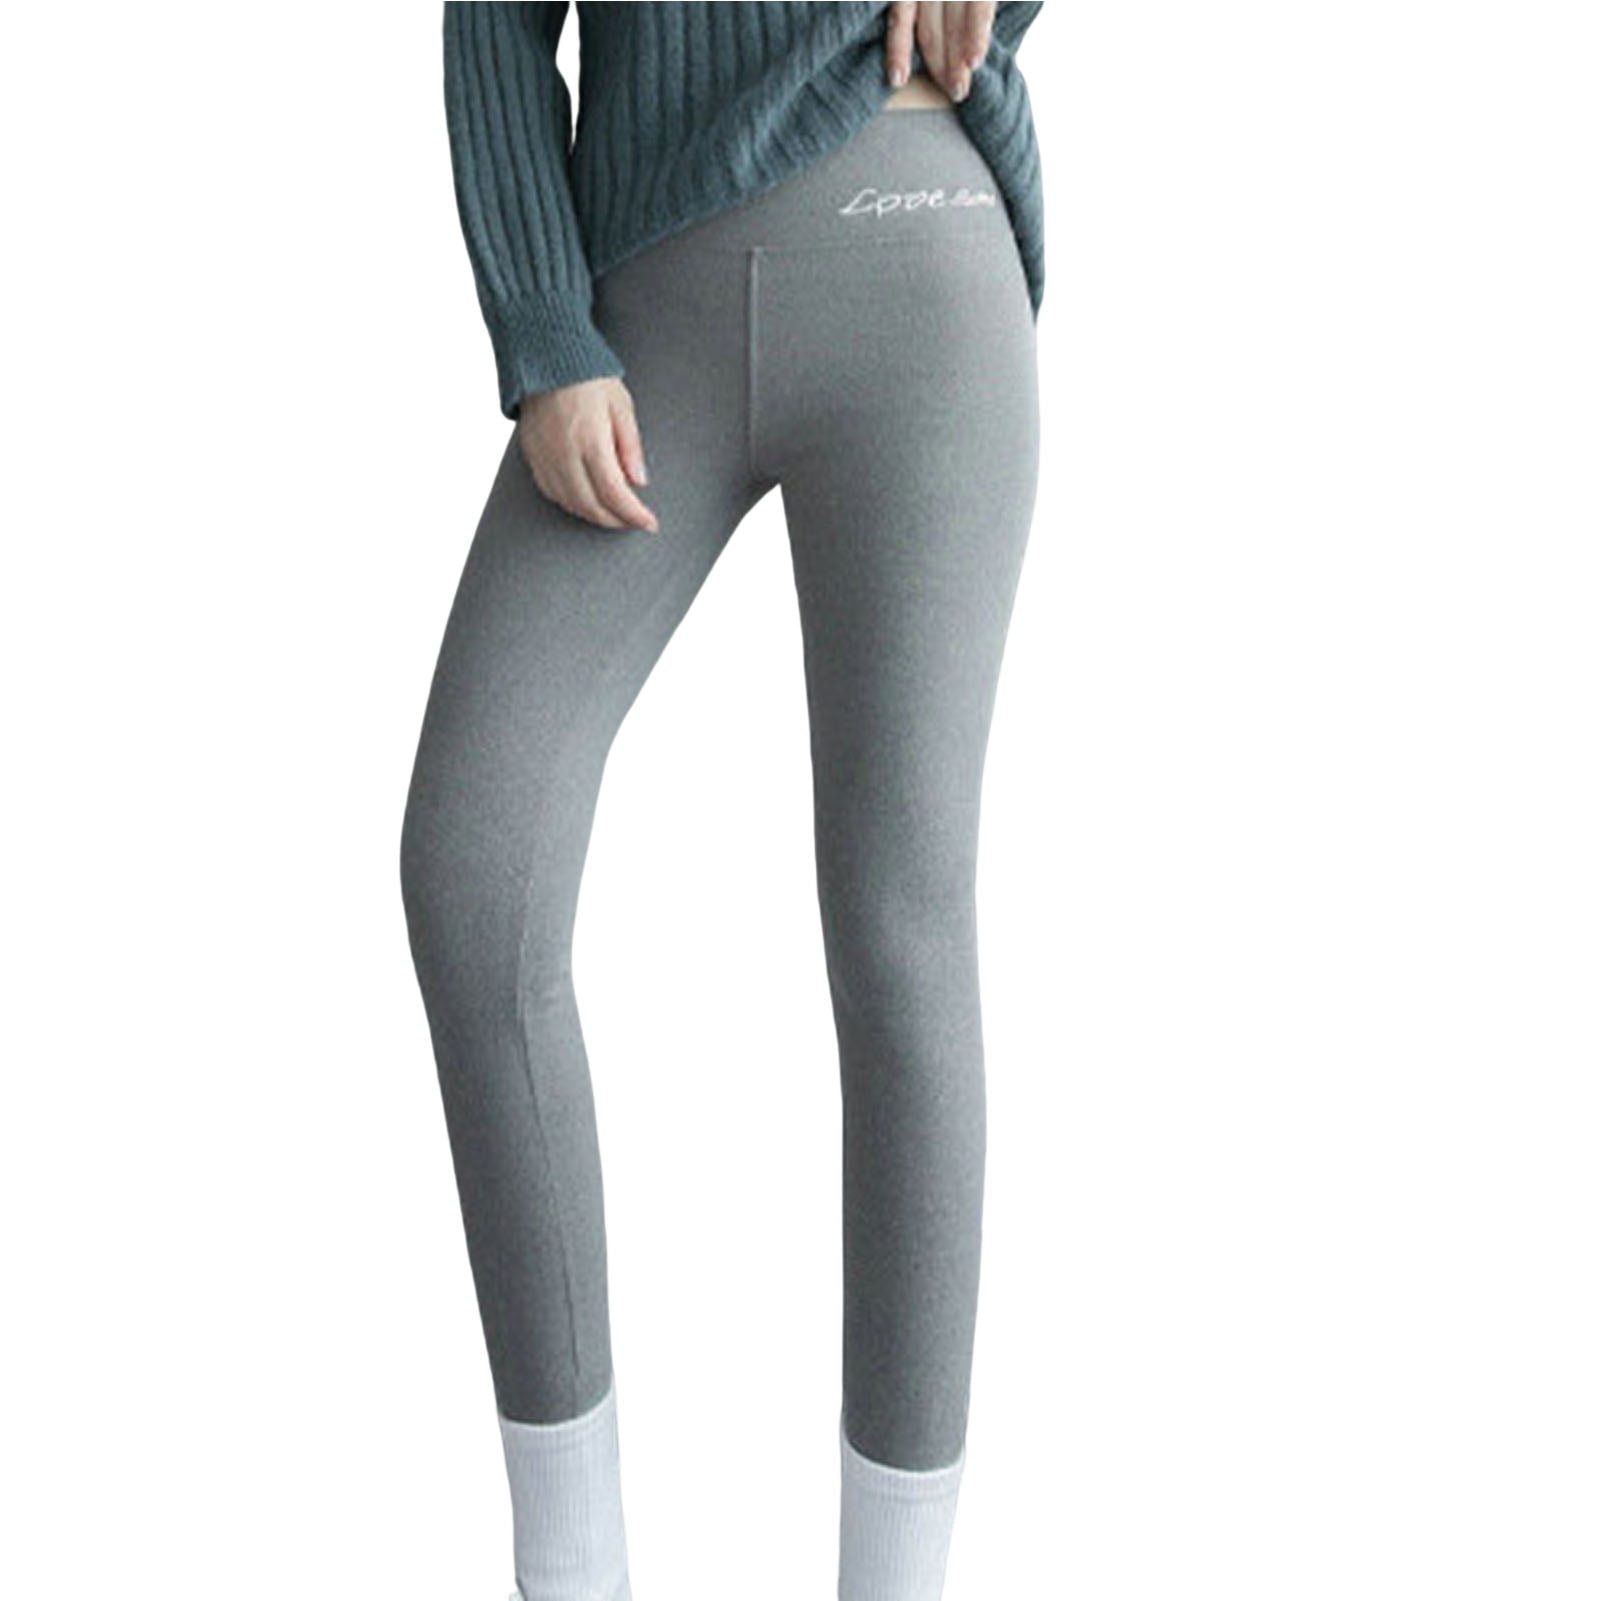 Fleece Lined Leggings Women Winter Warm Thick Tights Thermal